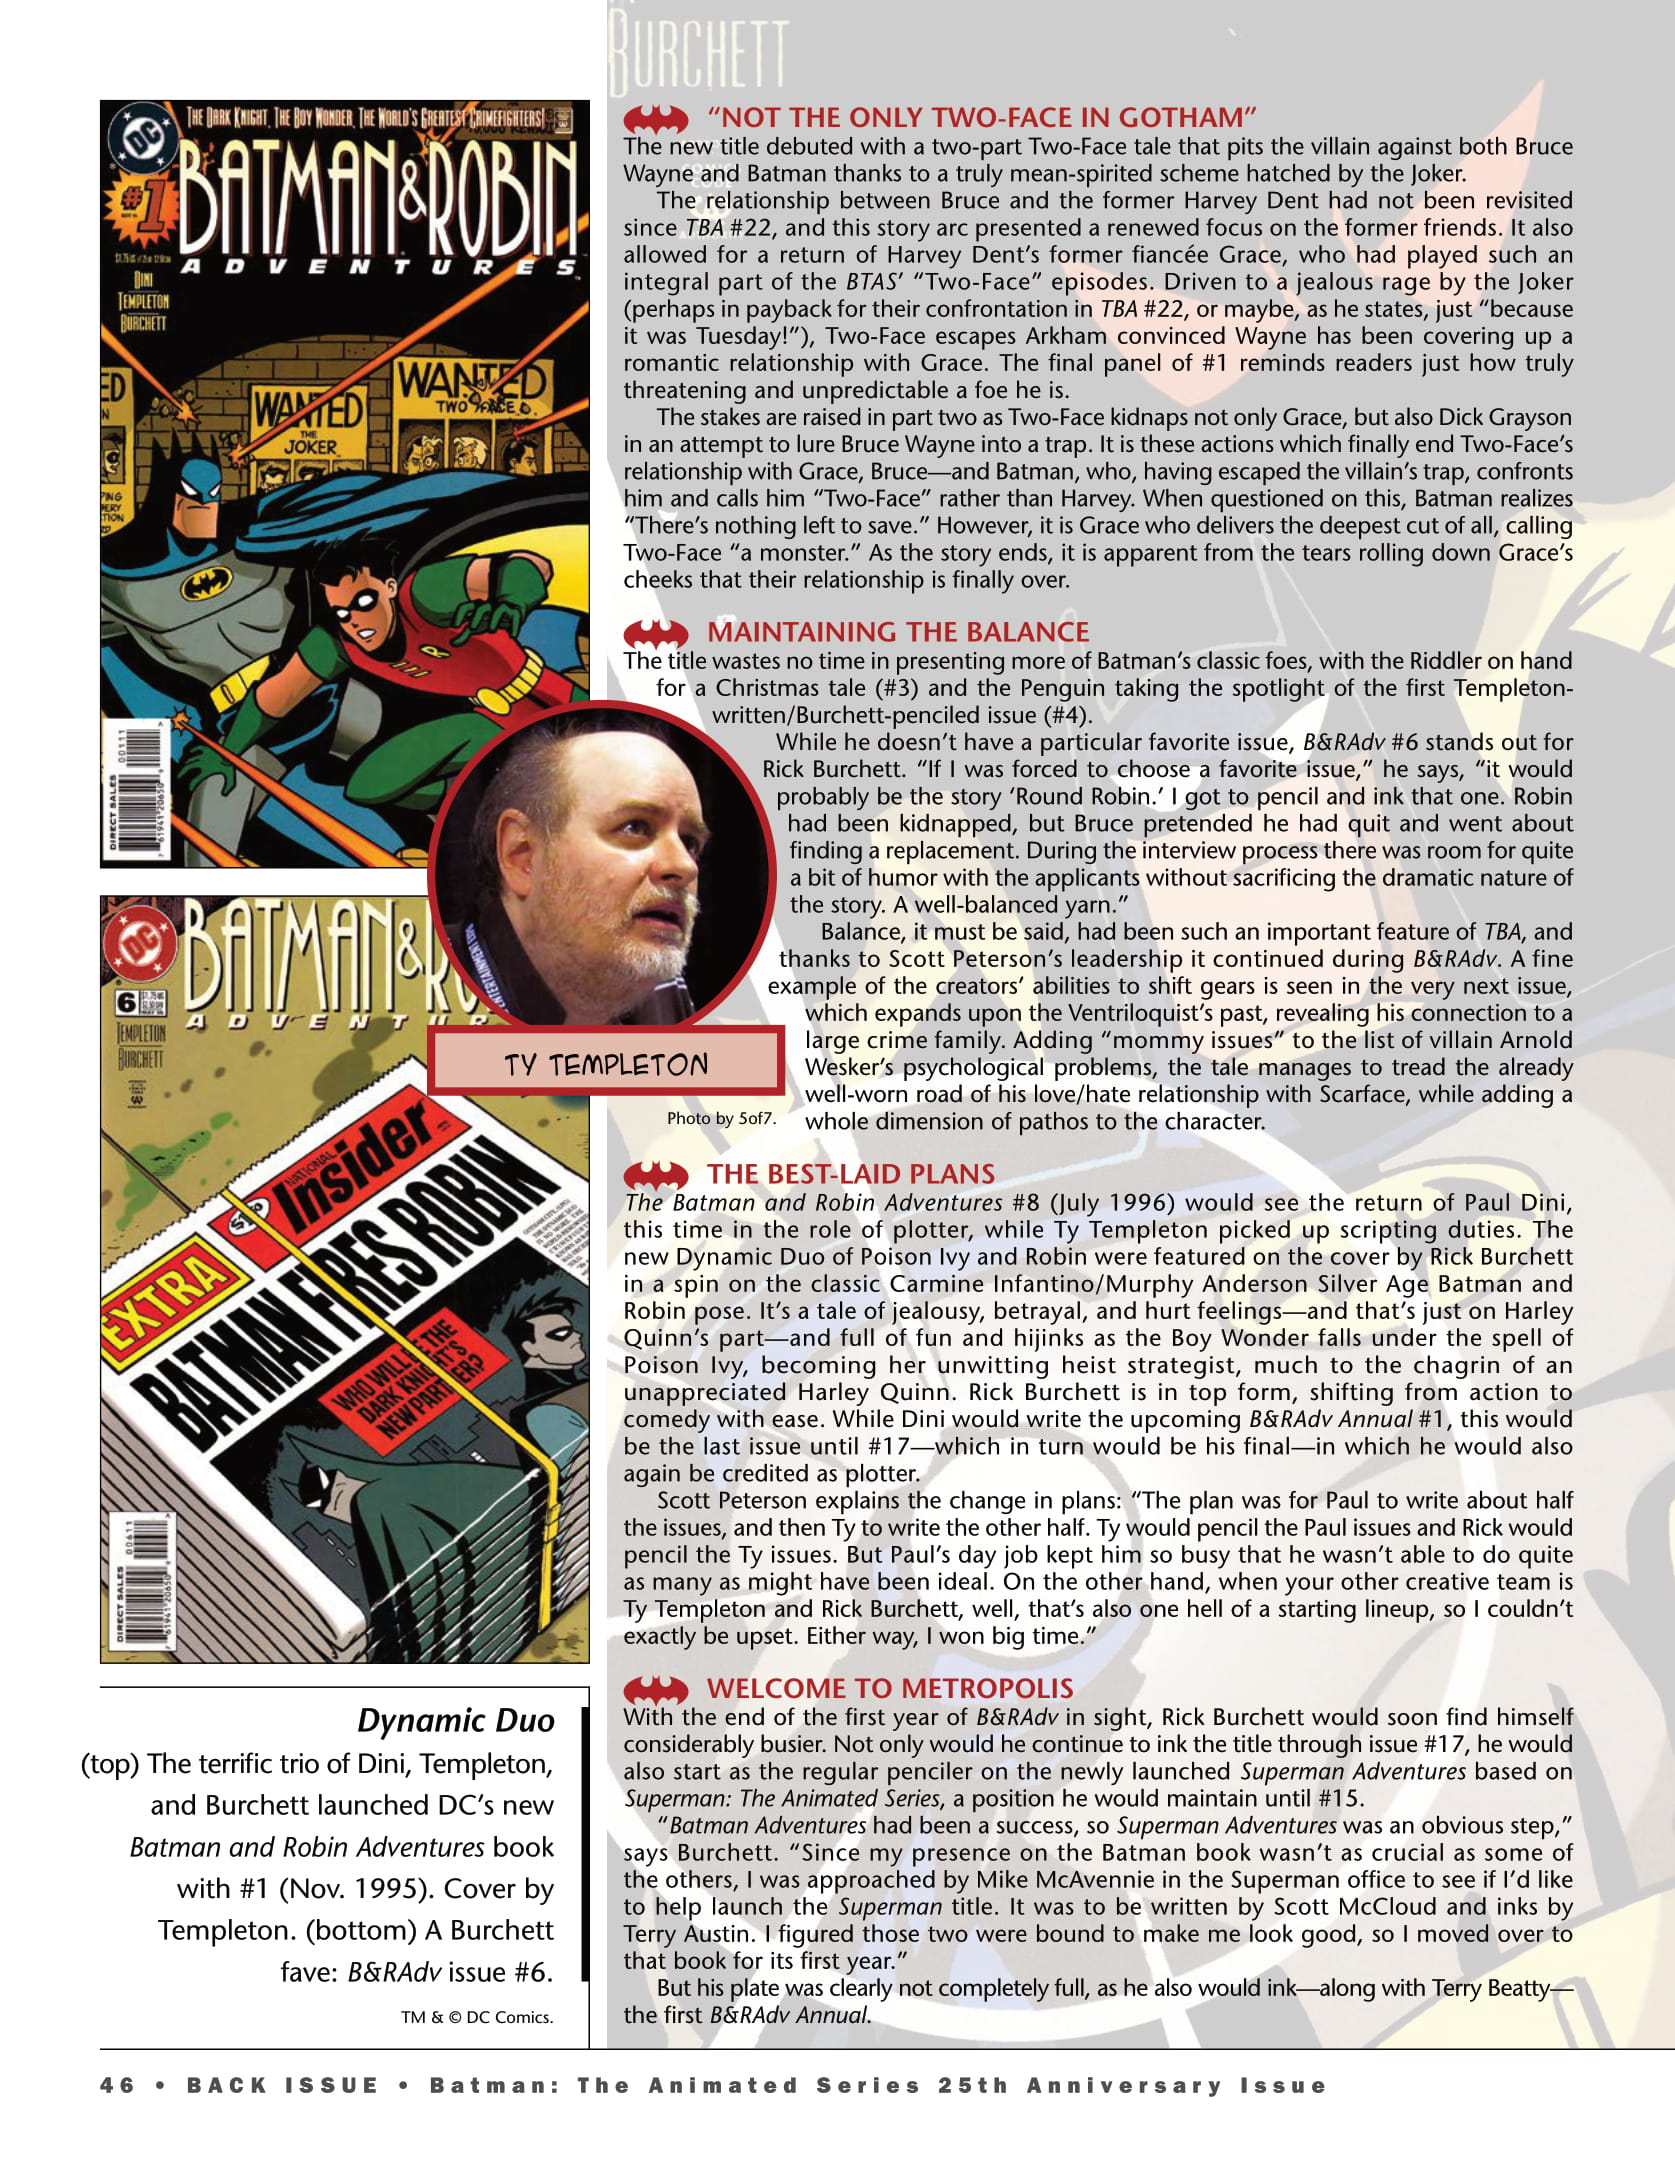 Read online Back Issue comic -  Issue #99 - 48